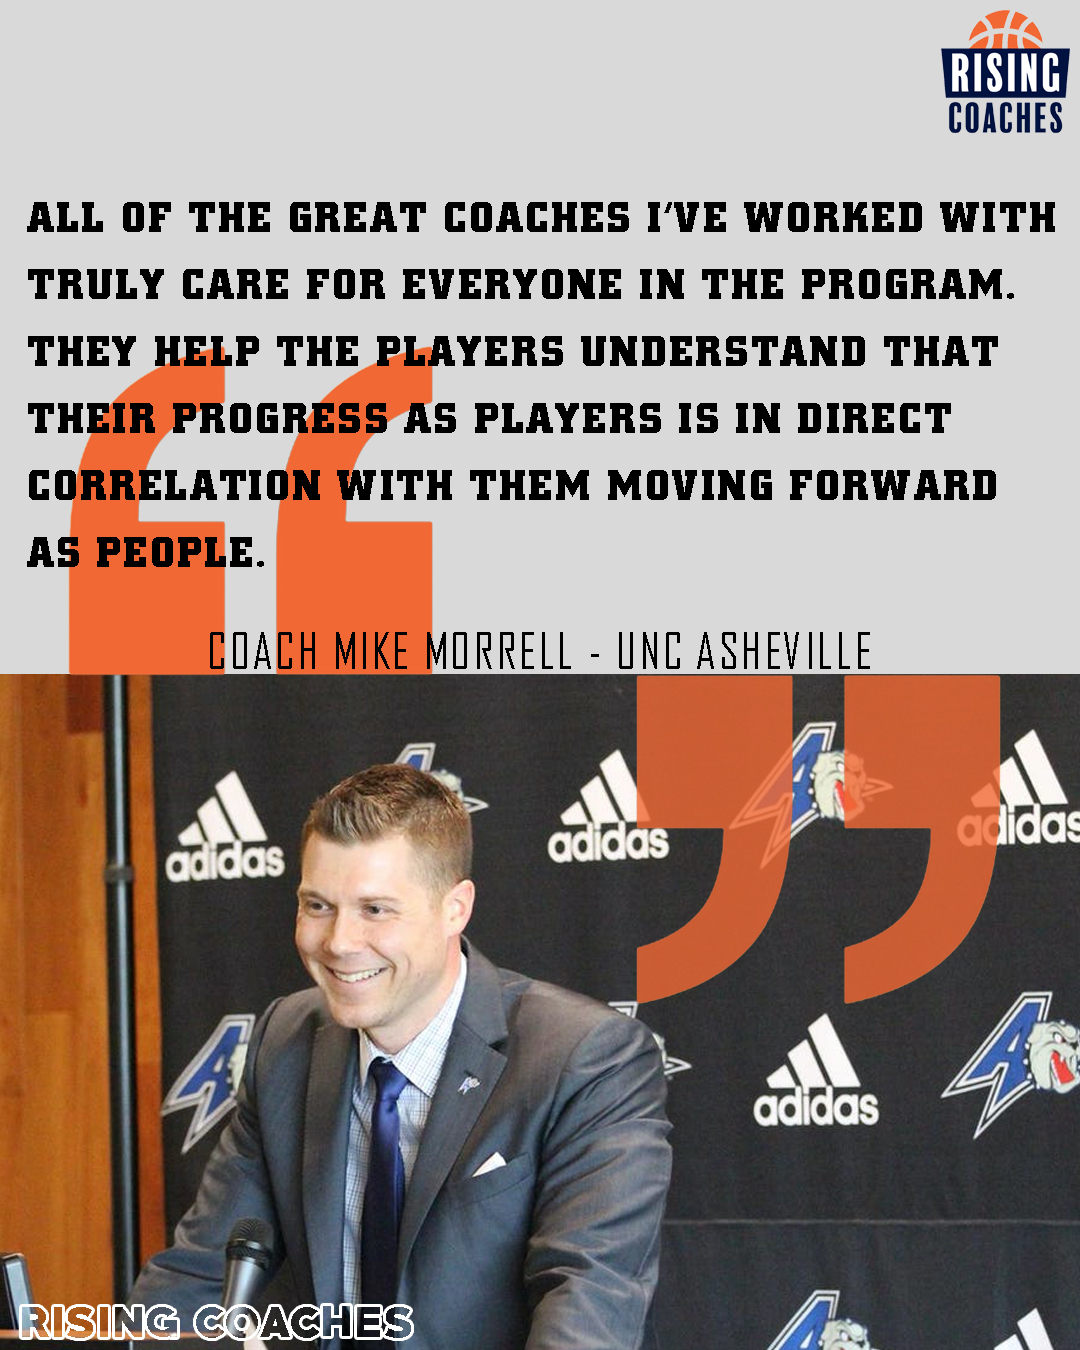 Quotes: Mike Morrell - UNC Asheville - The Great Coaches Truly Care